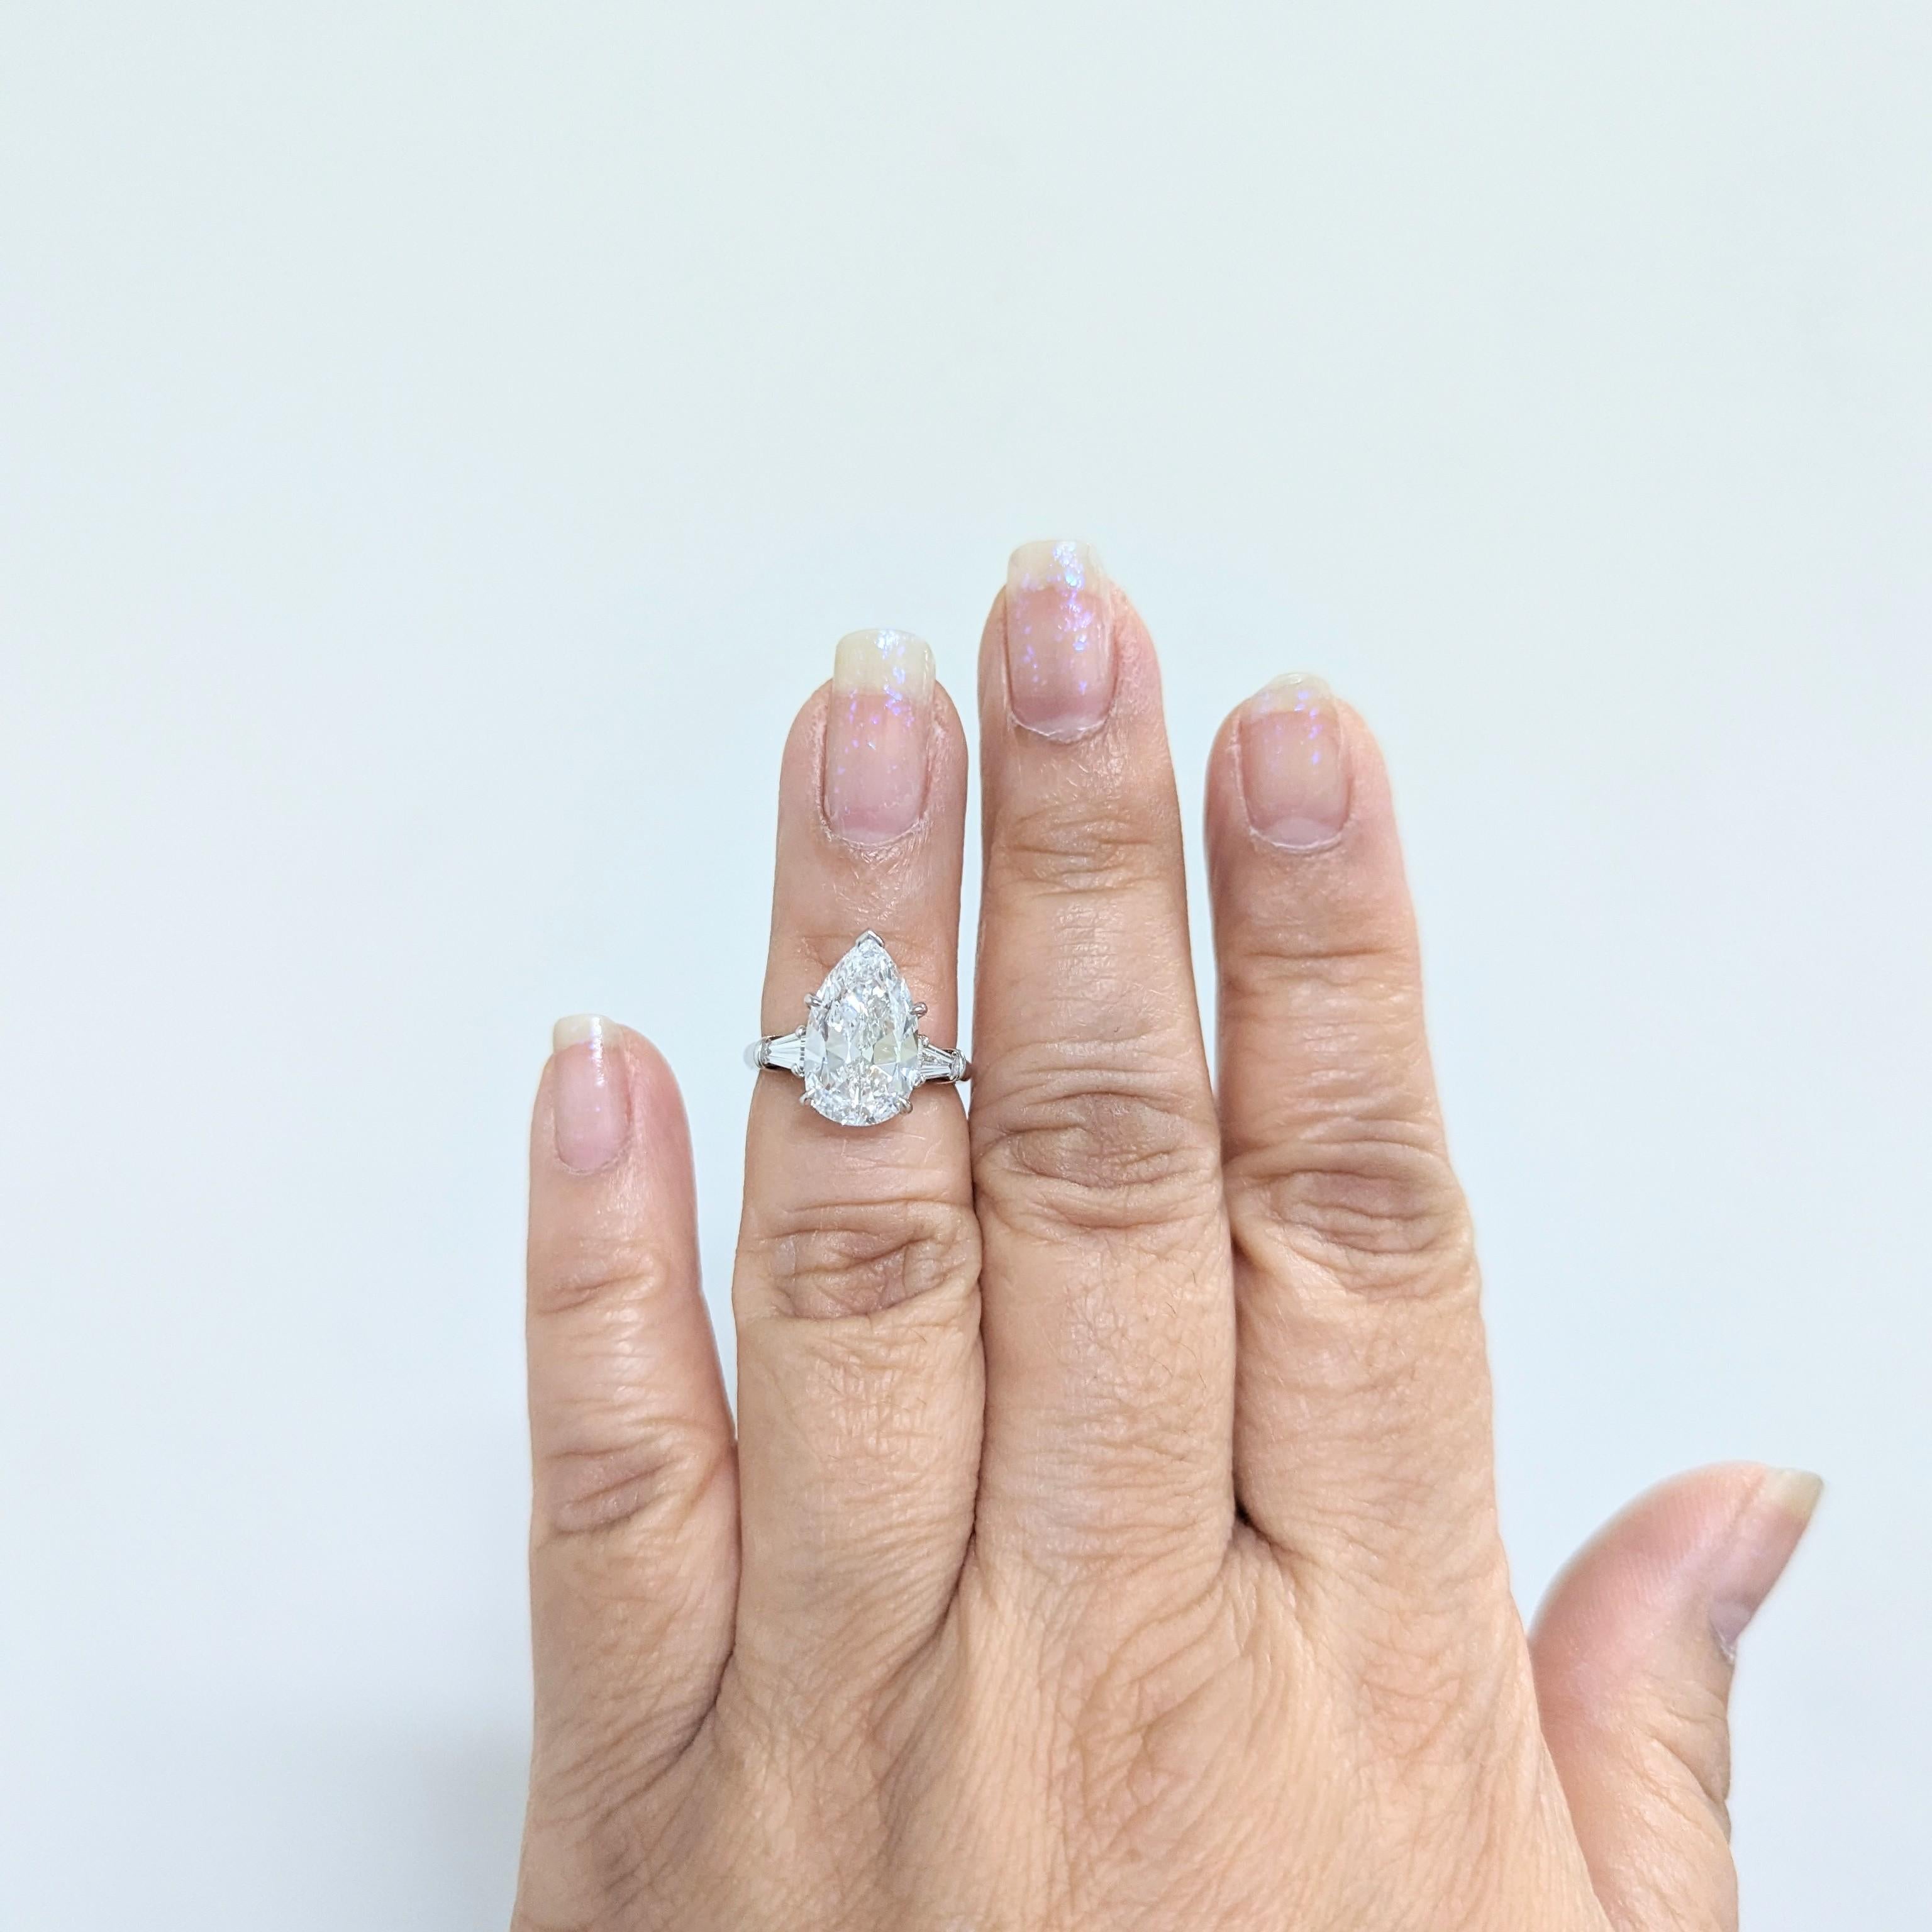 Absolutely gorgeous estate Harry Winston three stone ring featuring a 3.60 ct. white diamond pear shape D VVS1 with 0.34 ct. good quality, white, and bright diamond baguettes on either side.  Handmade in platinum.  Ring size 5.  GIA certificate